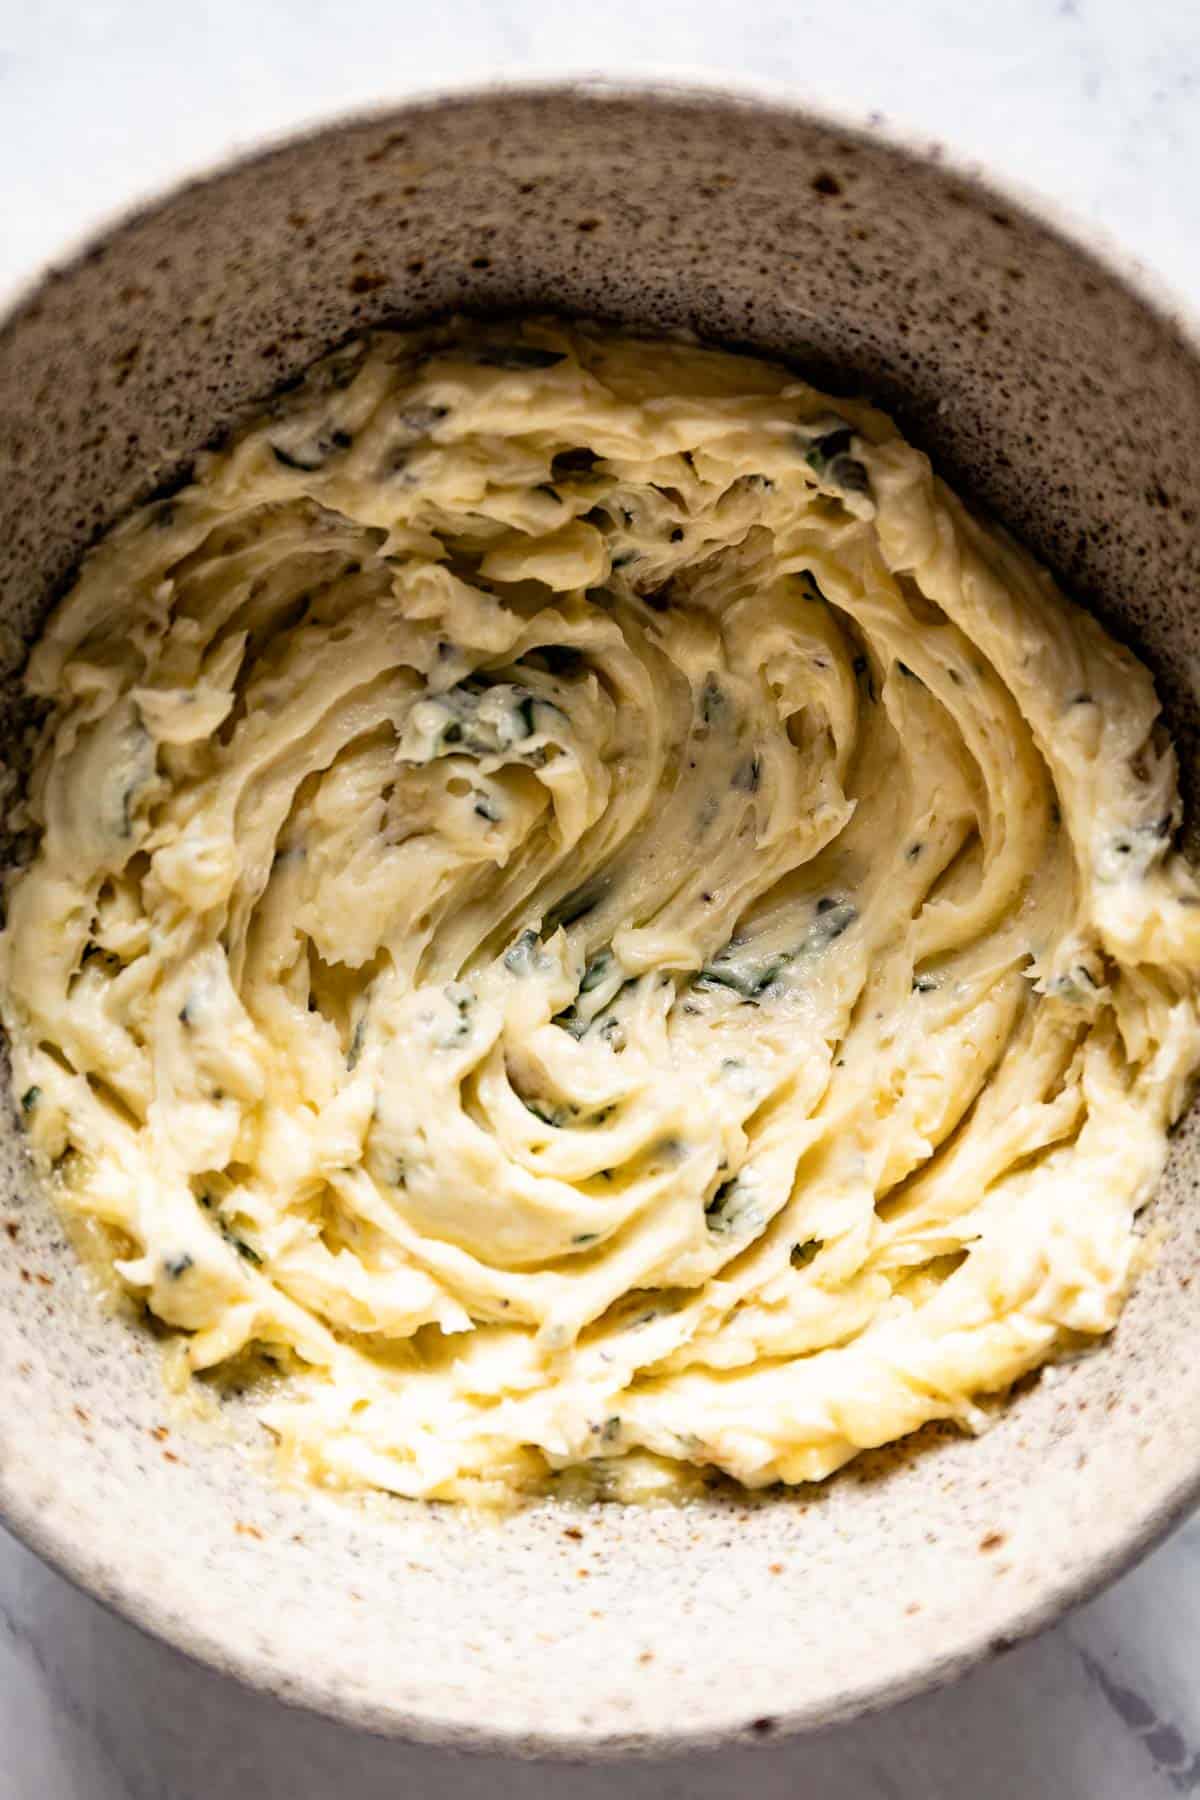 A bowl of compound butter with garlic and herbs from the top view.